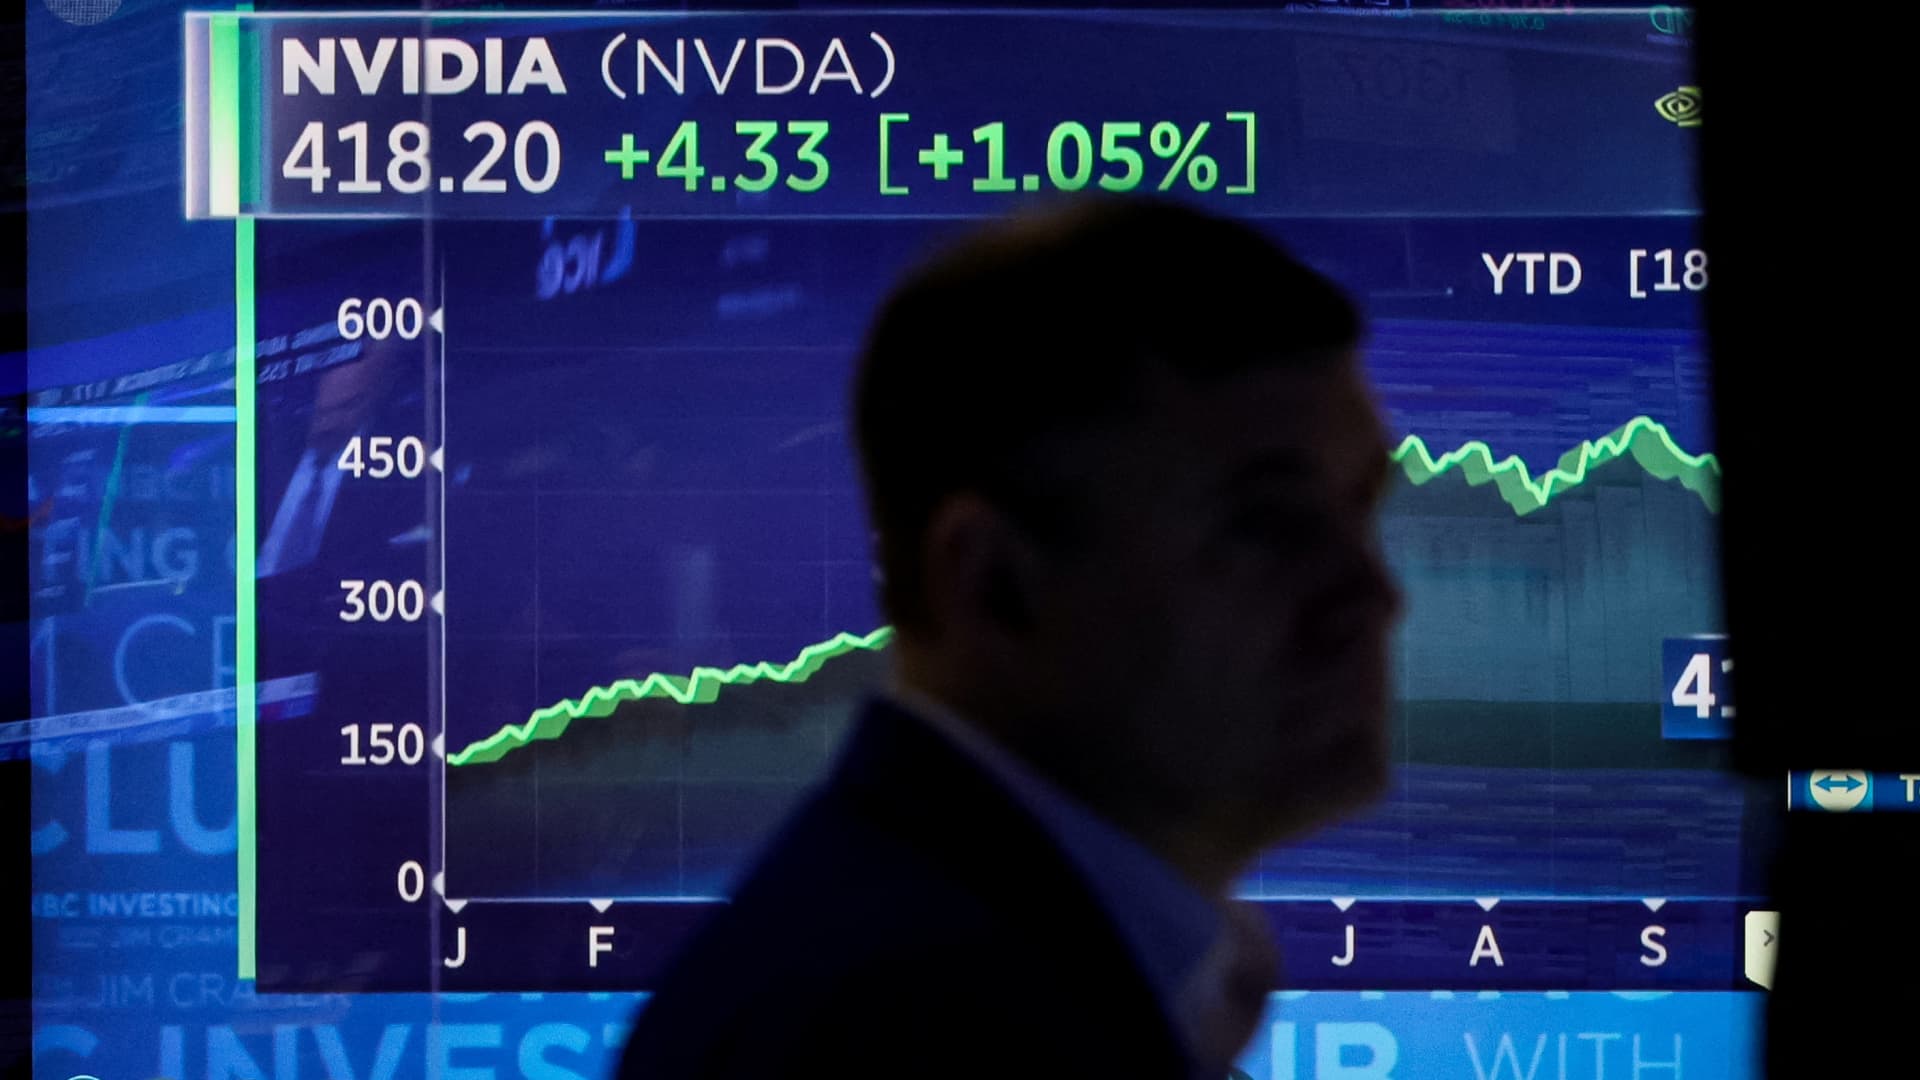 FOMO? Data shows investors are still ‘underweight’ Nvidia even as they chase the stock ever higher